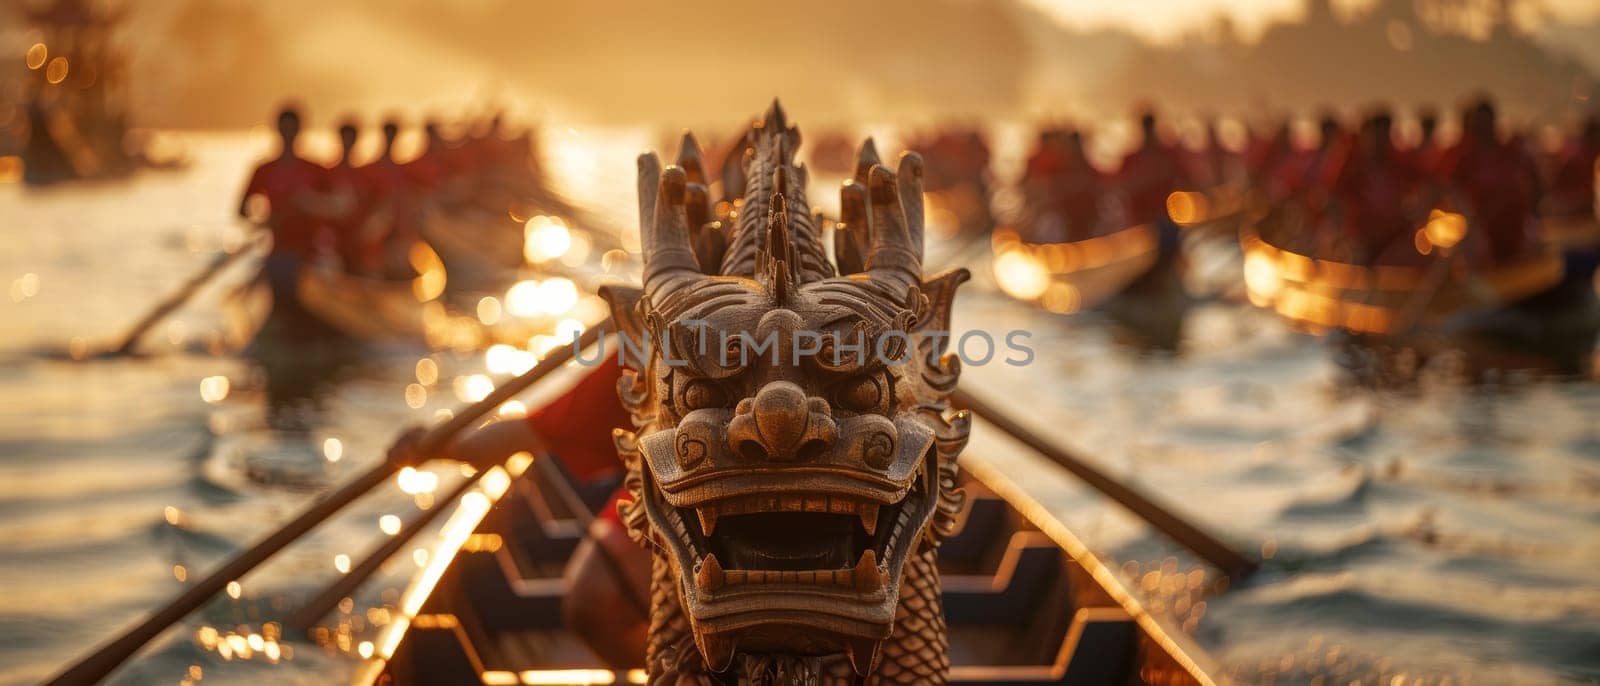 Colorful dragon boats queue on serene waters, their vibrant designs reflecting the festivity of the boat festival. by sfinks